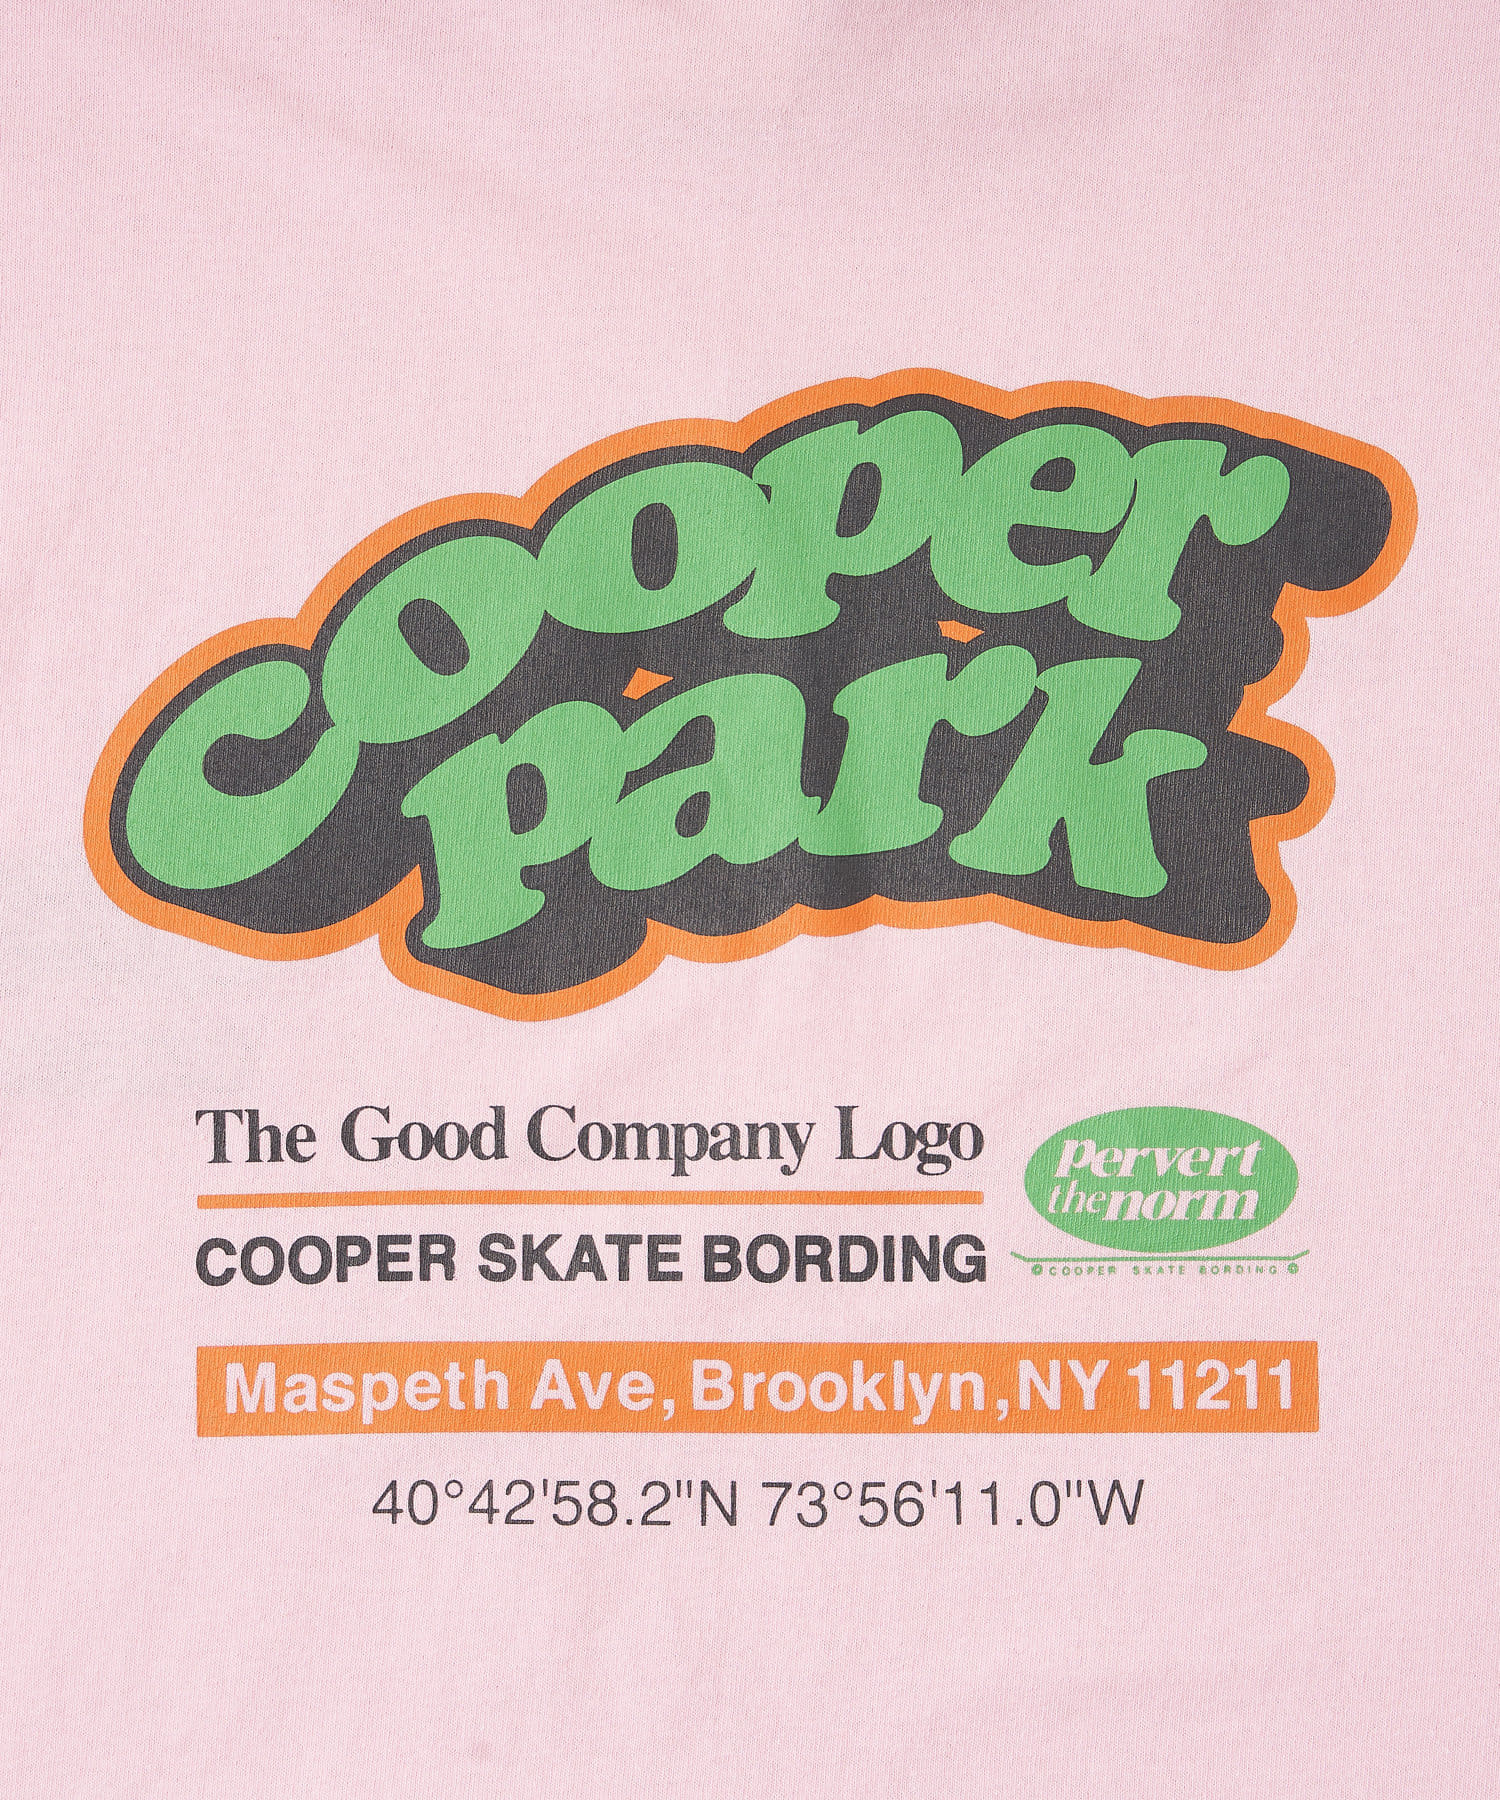 WHO’S WHO gallery(フーズフーギャラリー) COOPERPARK ロンTEE